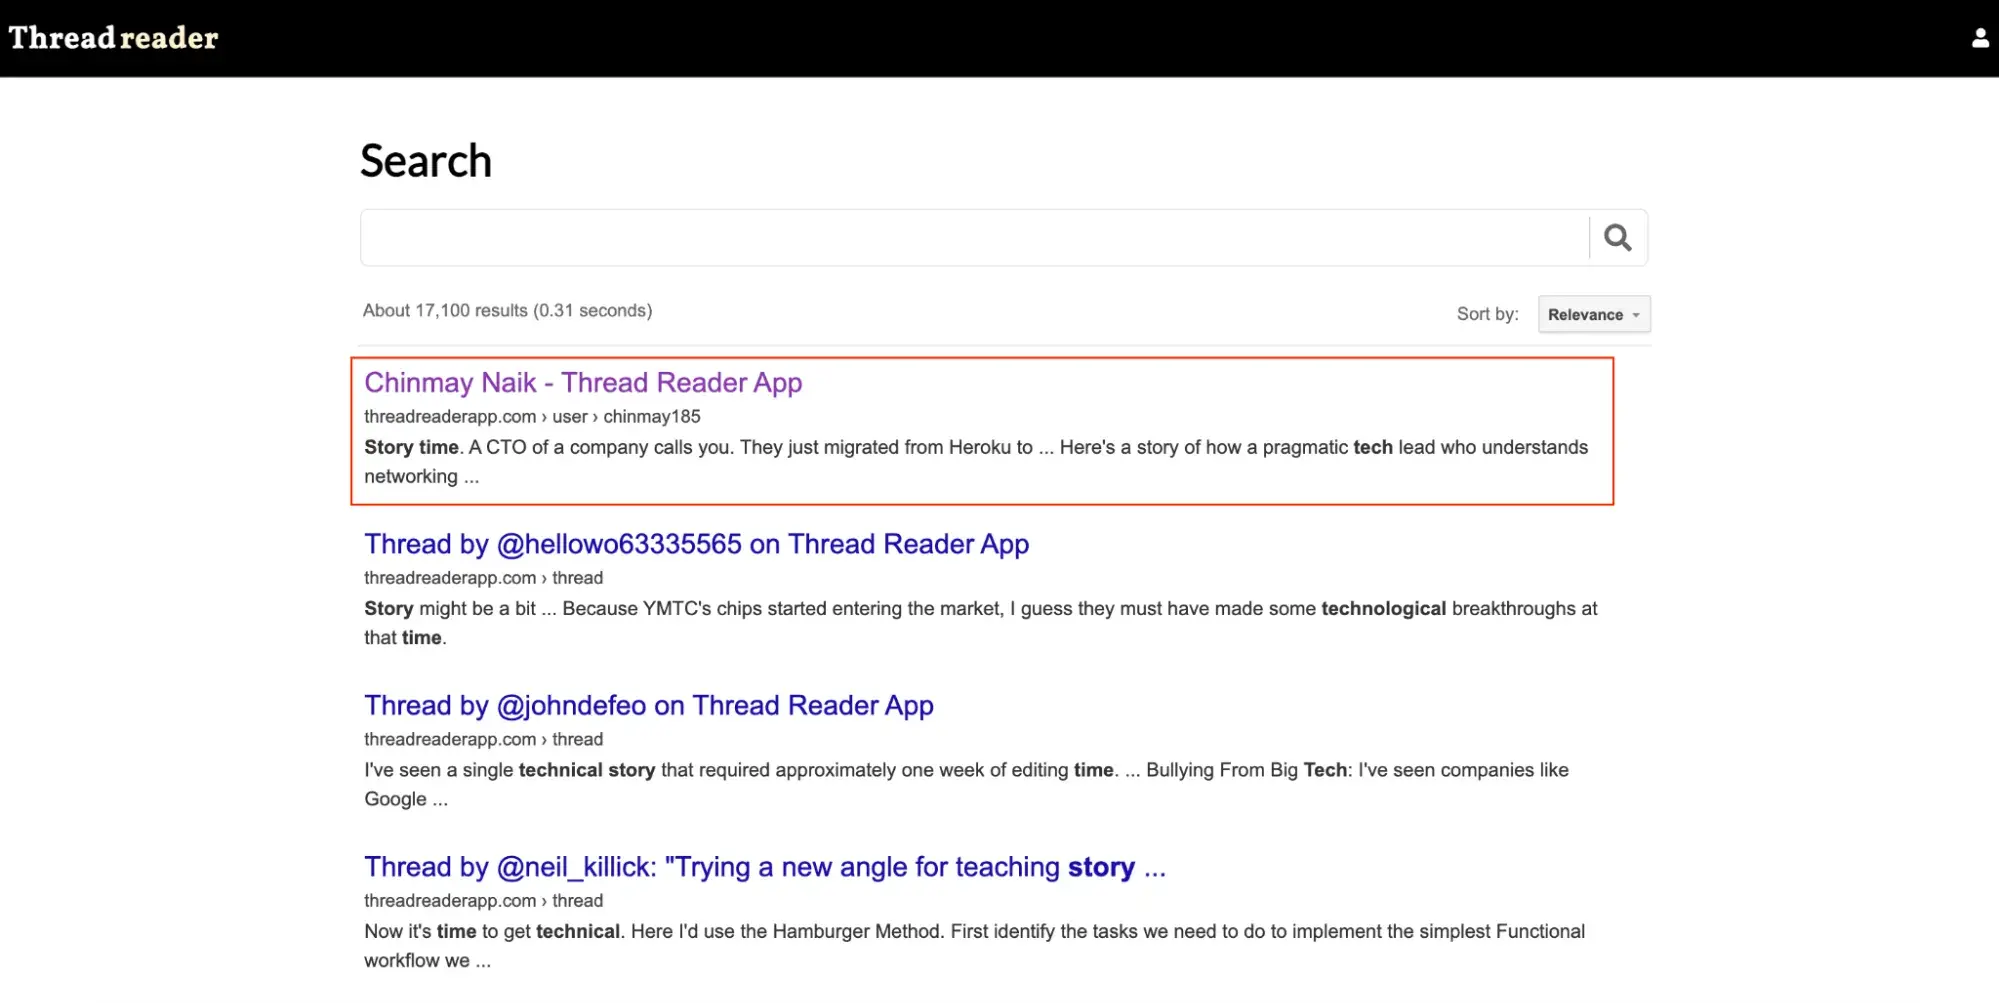 Results of my keyword search in threadreader